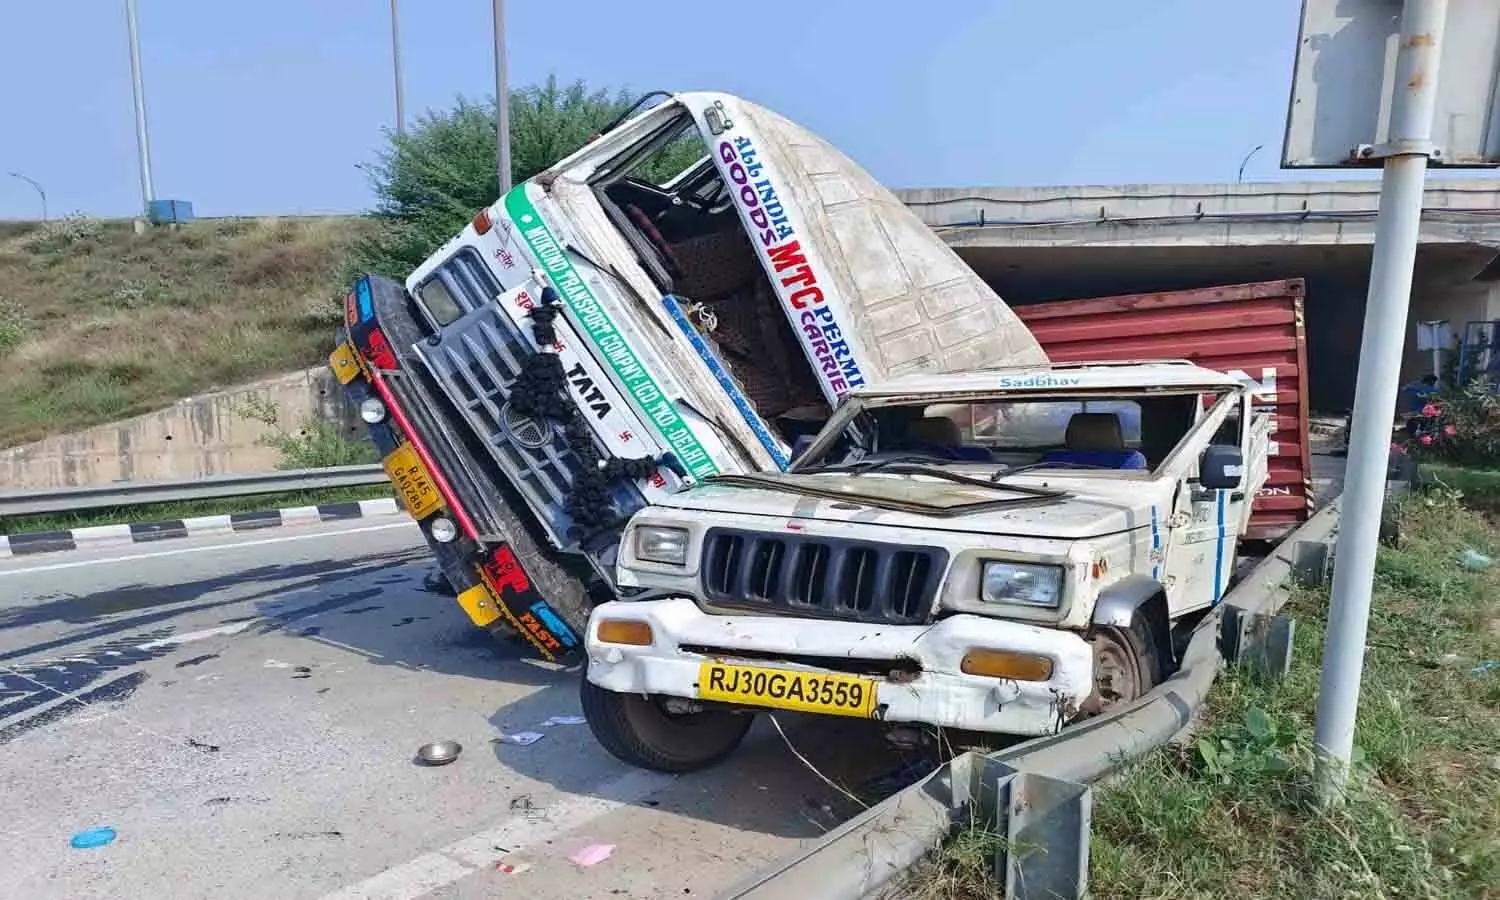 Baghpat Container Accident News: Four injured when speeding container overturns on patrolling vehicle in EPE underpass